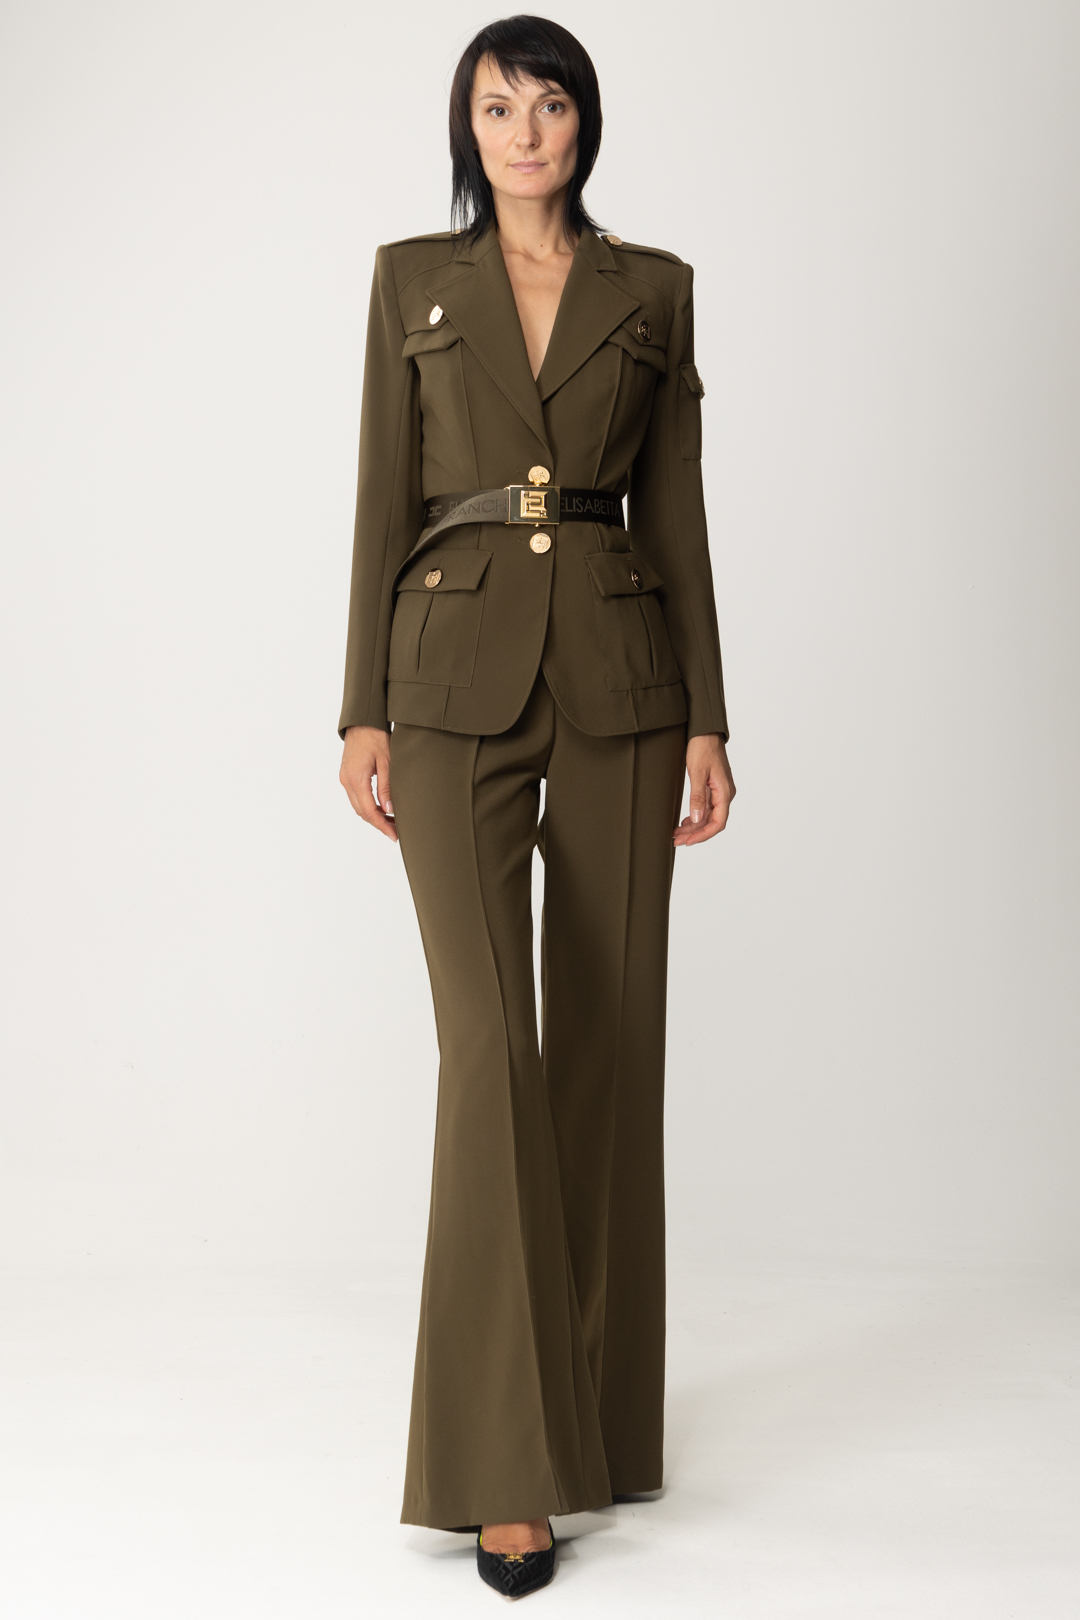 Preview: Elisabetta Franchi Jacket with large pockets and belts ARMY